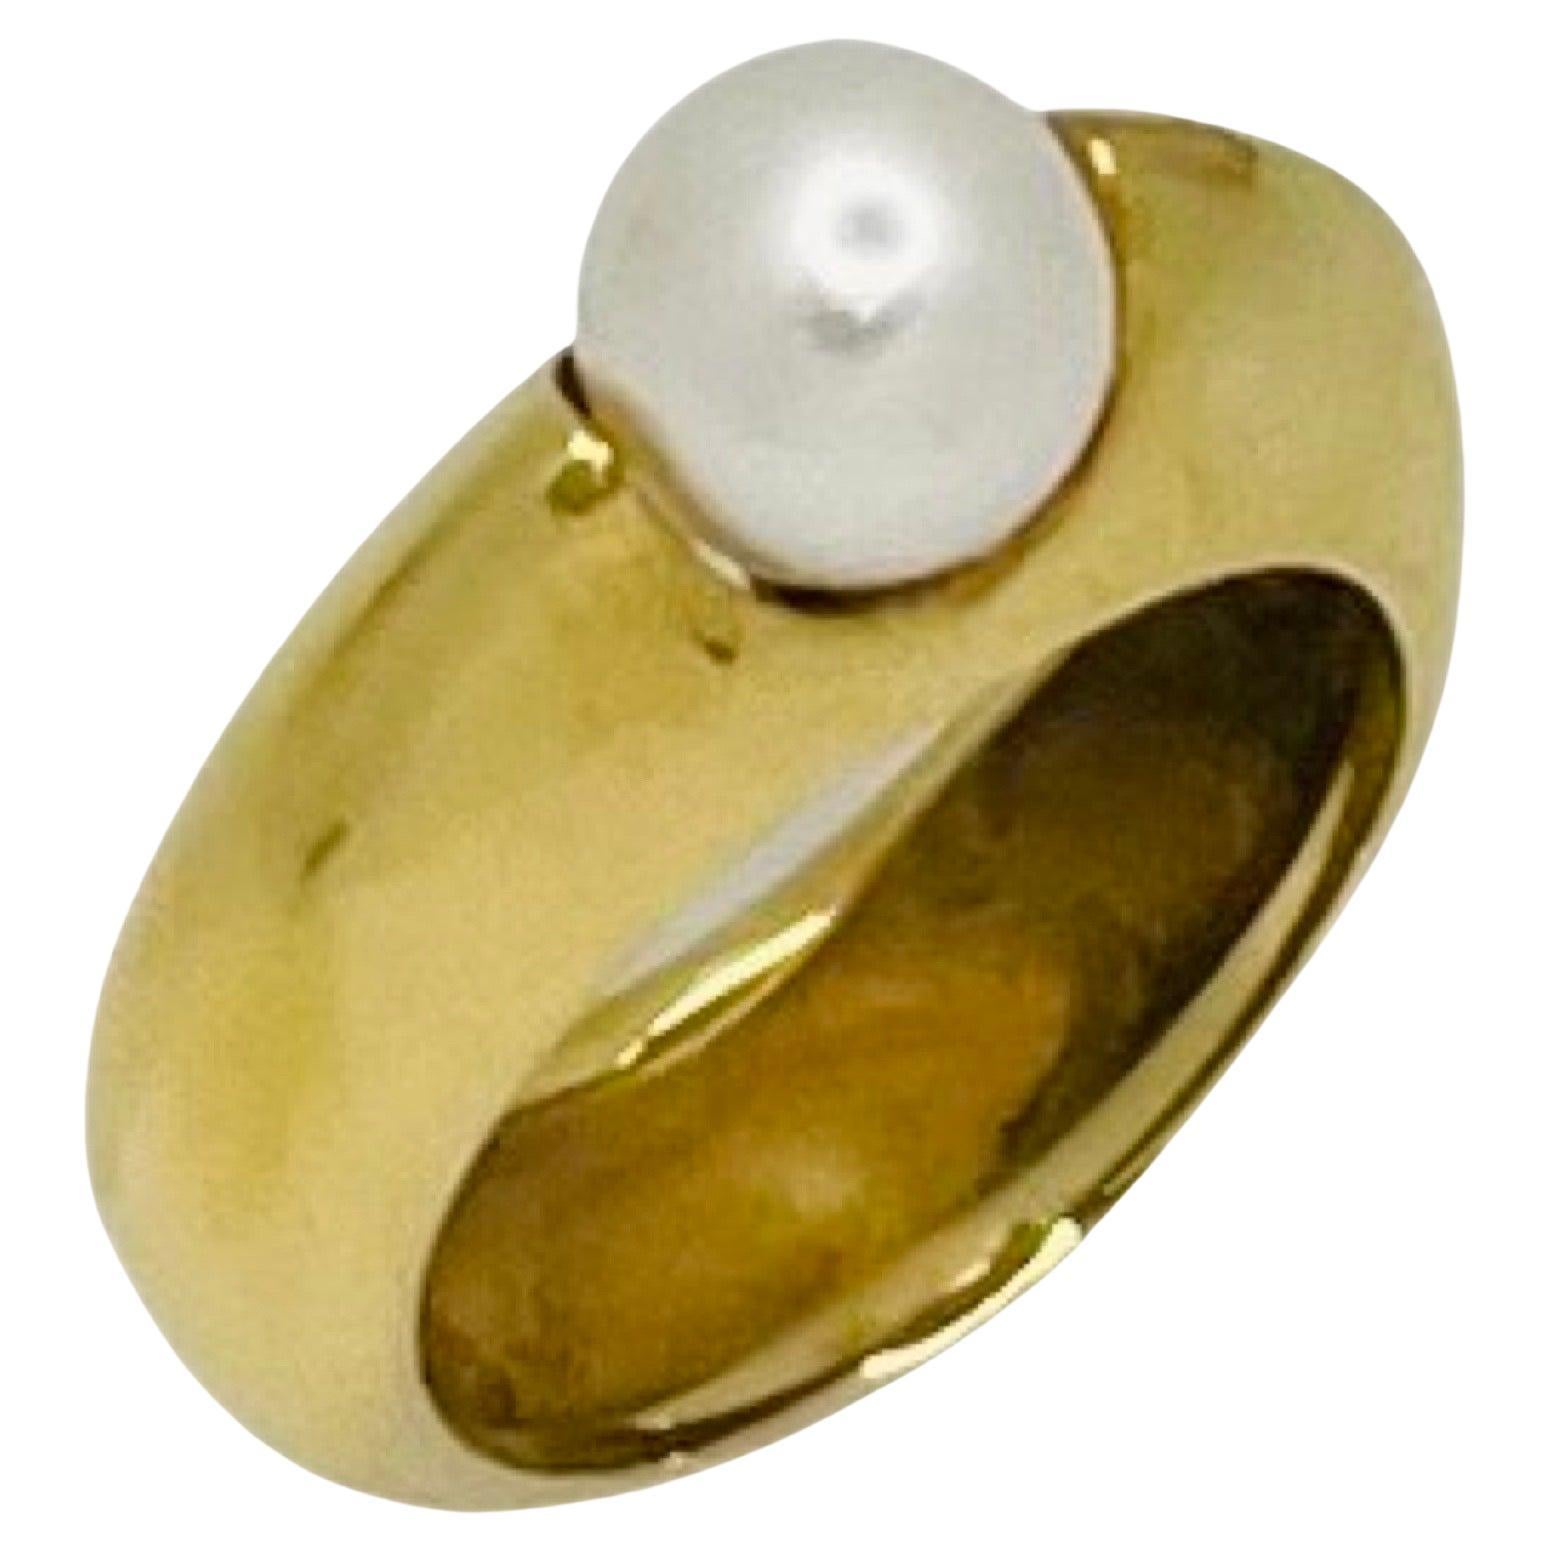 William Richey 18K Yellow Gold Japanese Akoya Pearl Ring with a Euro Shank